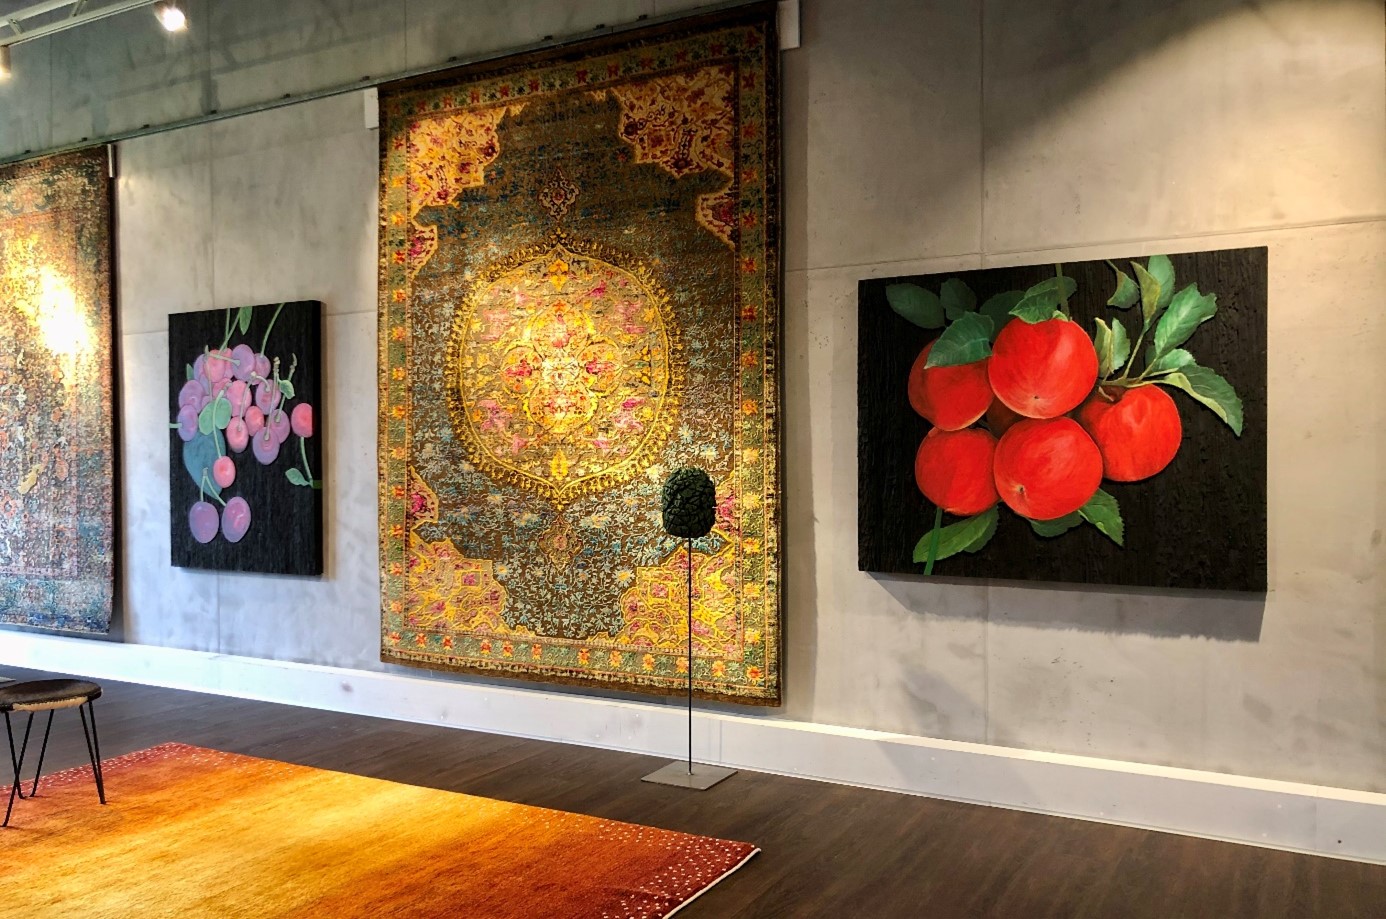 Works of art and beautiful rugs